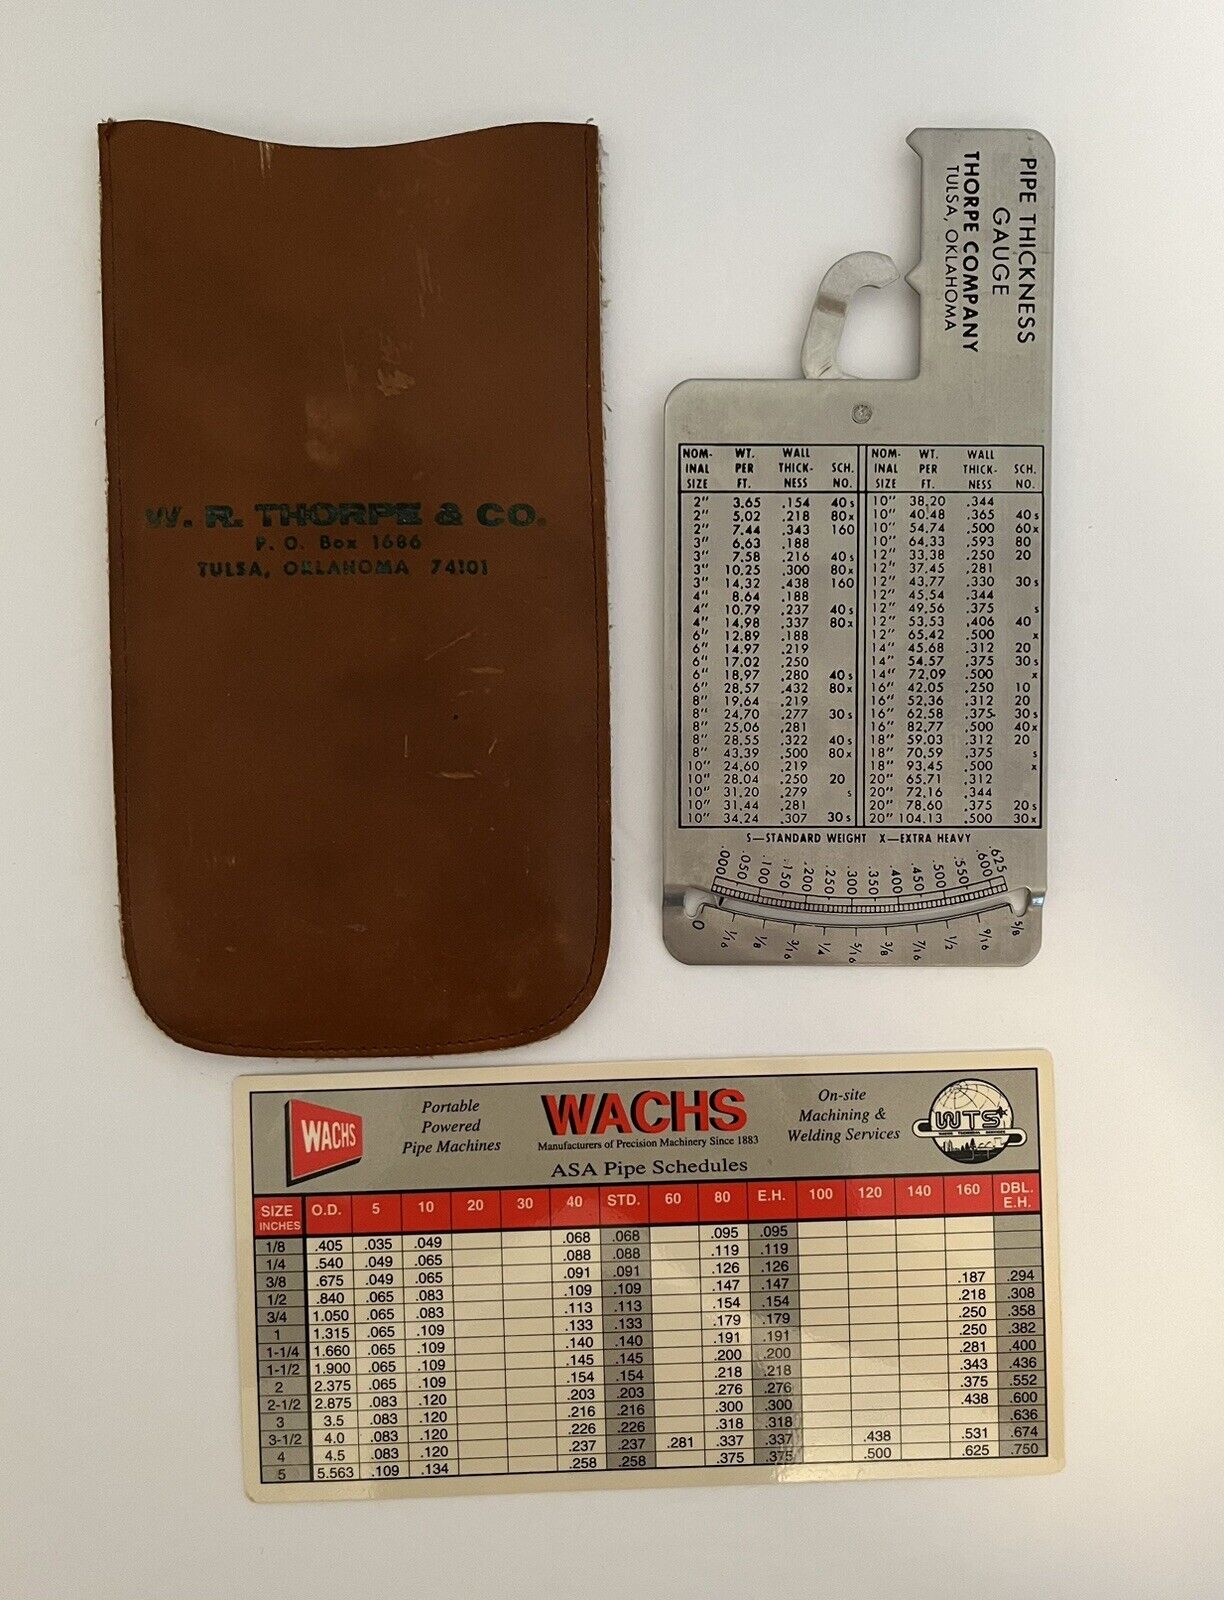 Vintage W. R. Thorpe Co. Pipe Thickness Gauge With Leather Case~Wachs ASA Chart